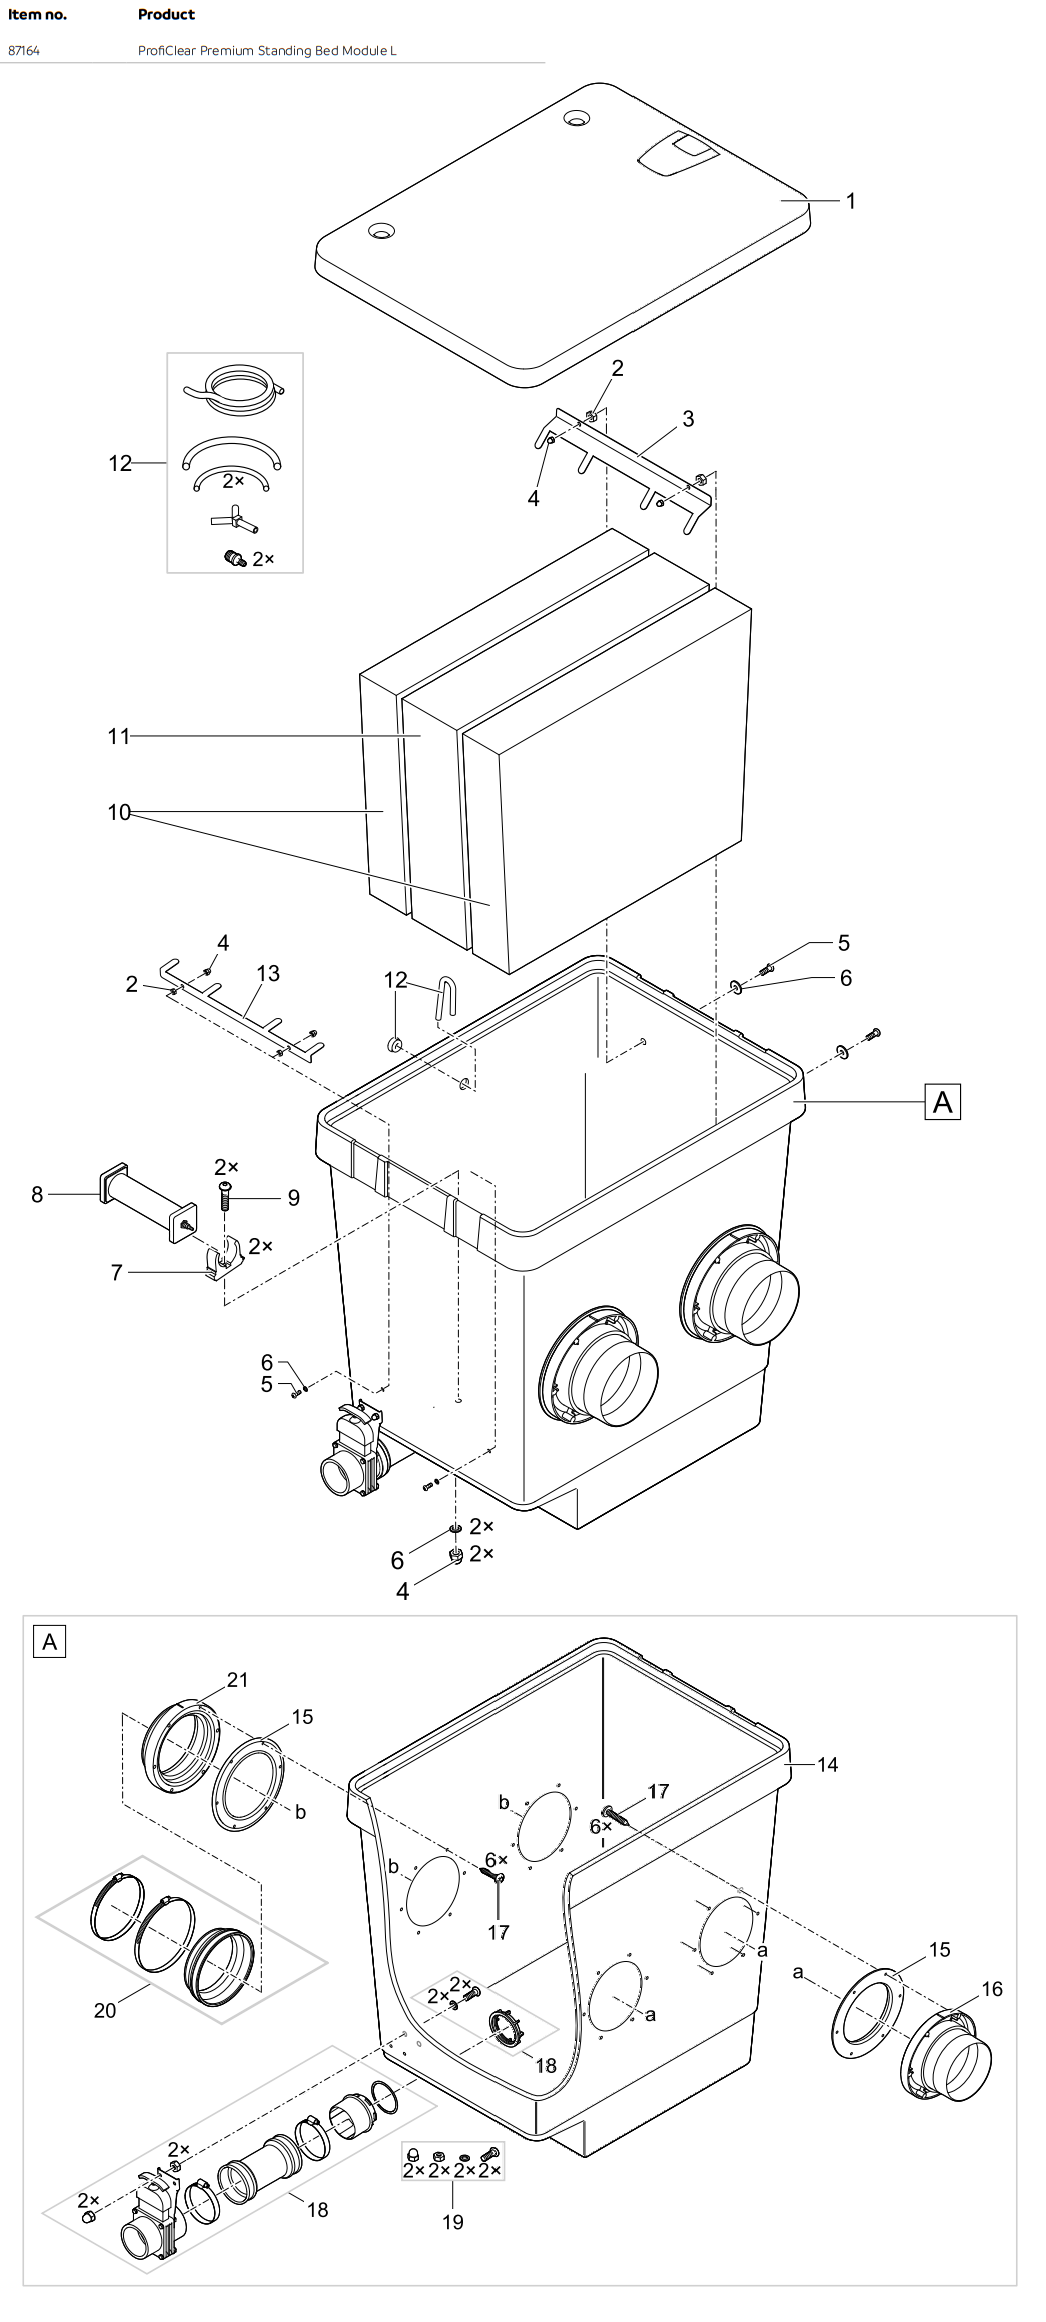 Standing Bed Module L Exploded Diagram